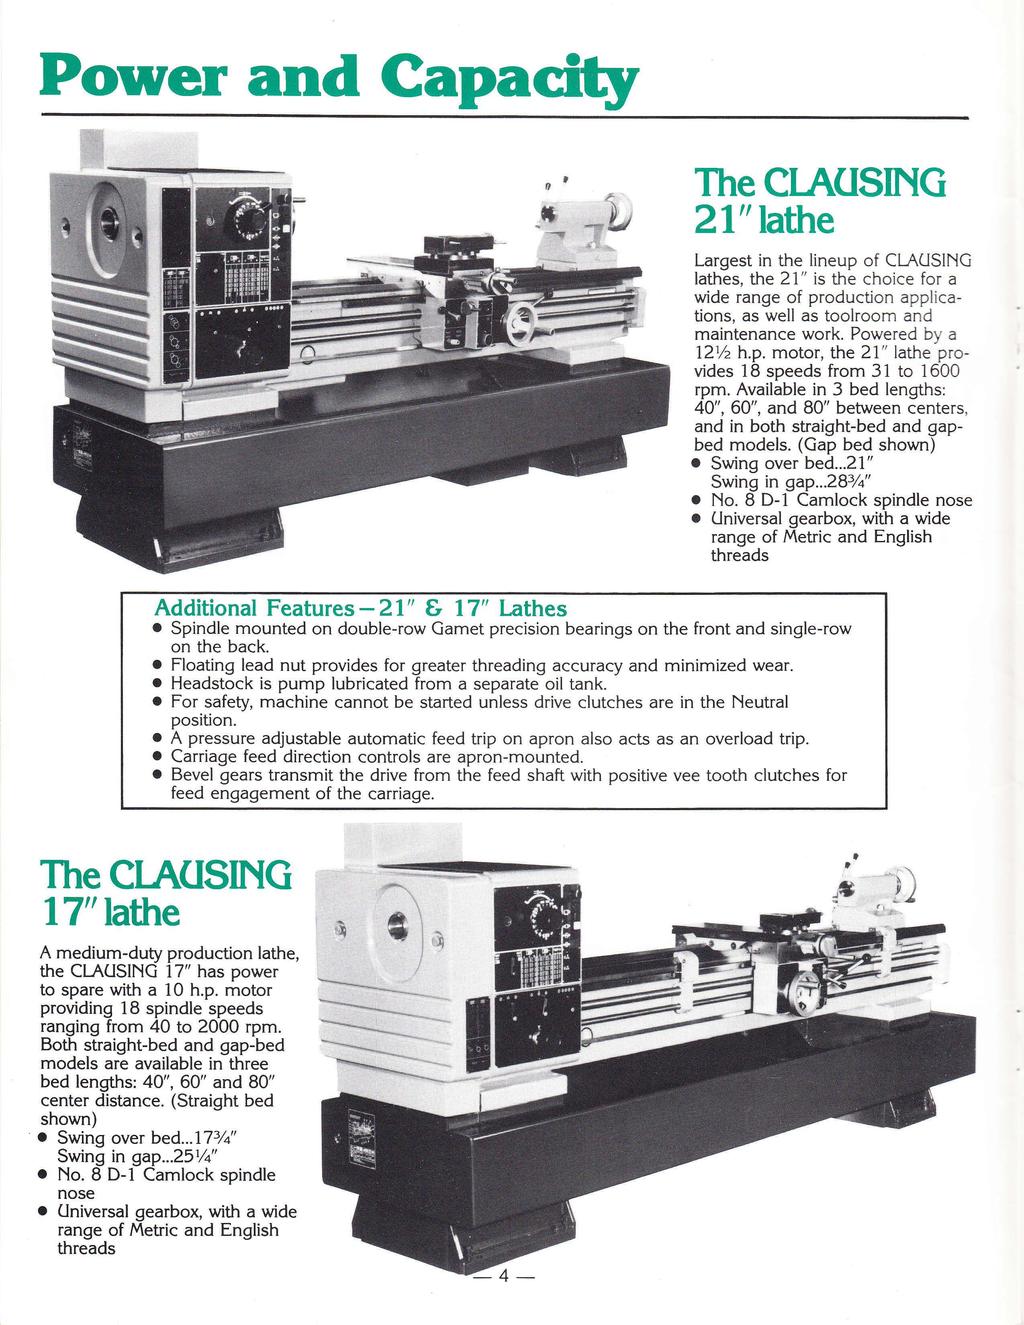 Power and Capacity The CLAUSING 21" lathe Largest in the lineup of CLAUSING lathes, the 21 is the choice for a wide range of production applications, as well as toolroom and maintenance work.